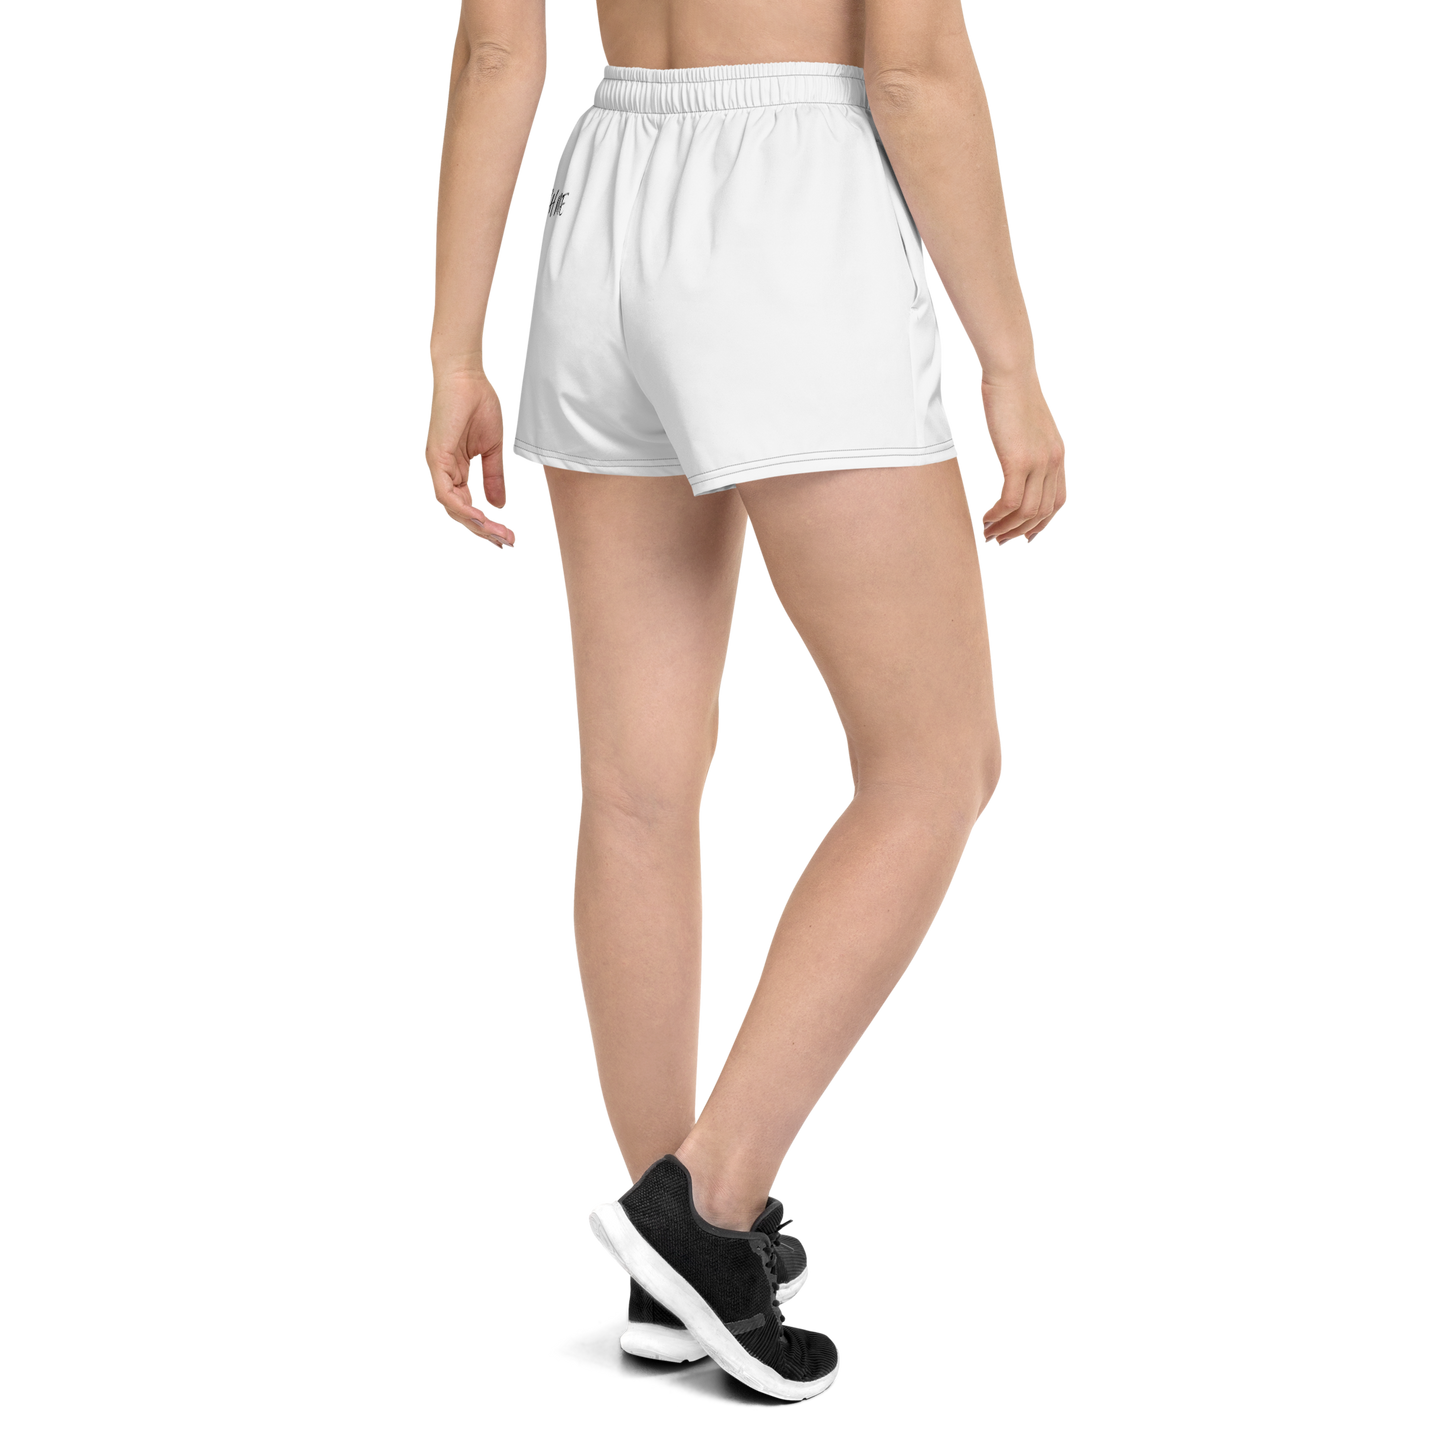 'Watch Me' Women’s Recycled Athletic Shorts